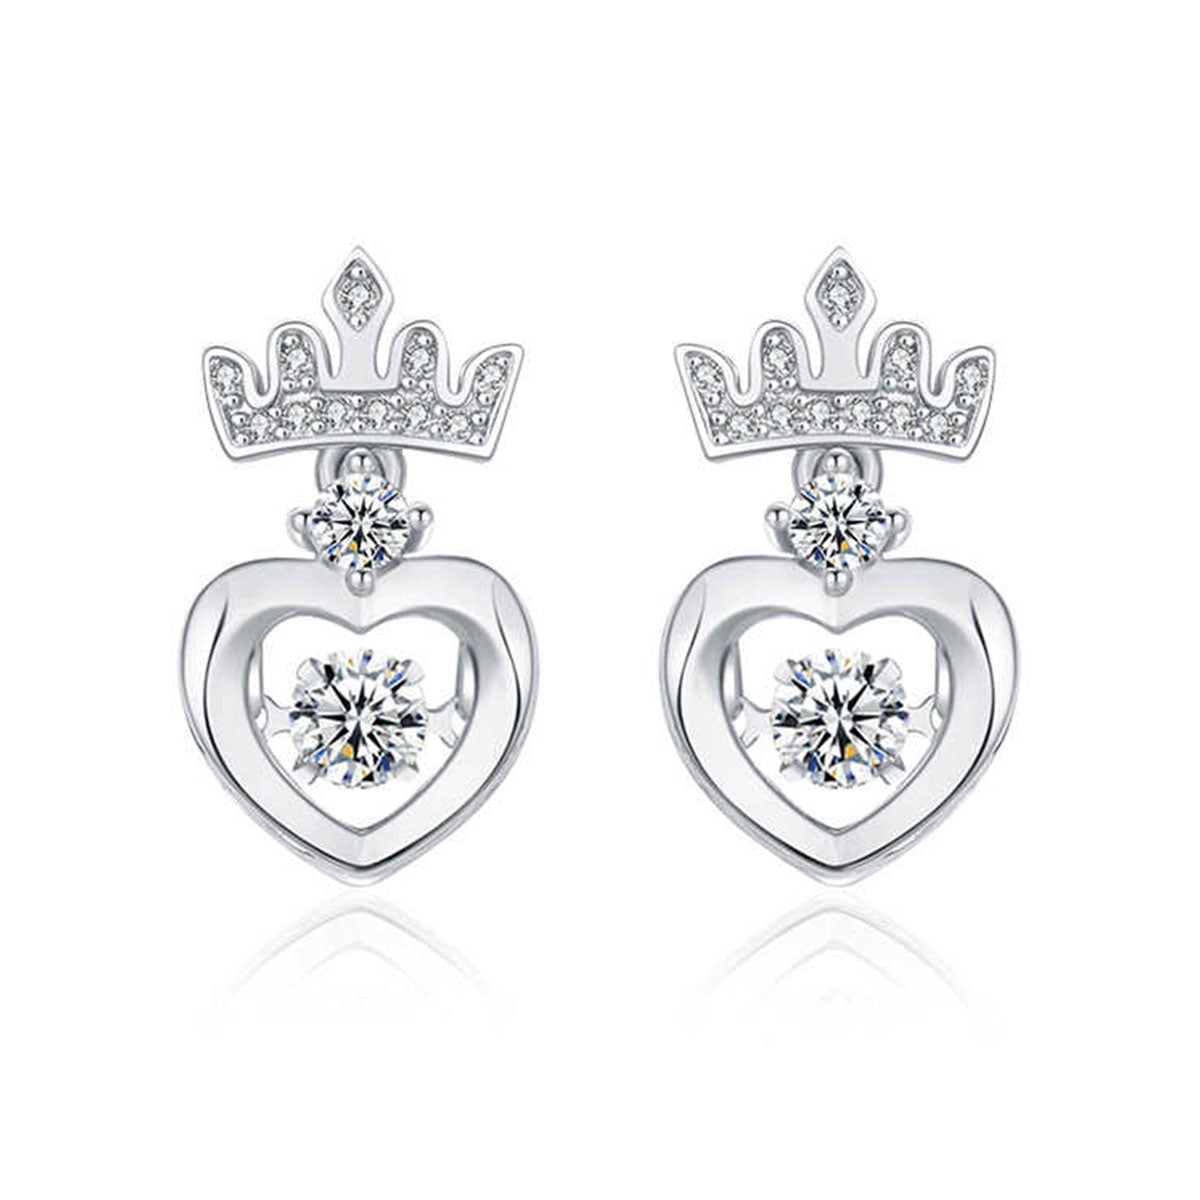 White Gold Crown Beating Heart Hollow Drop Earrings